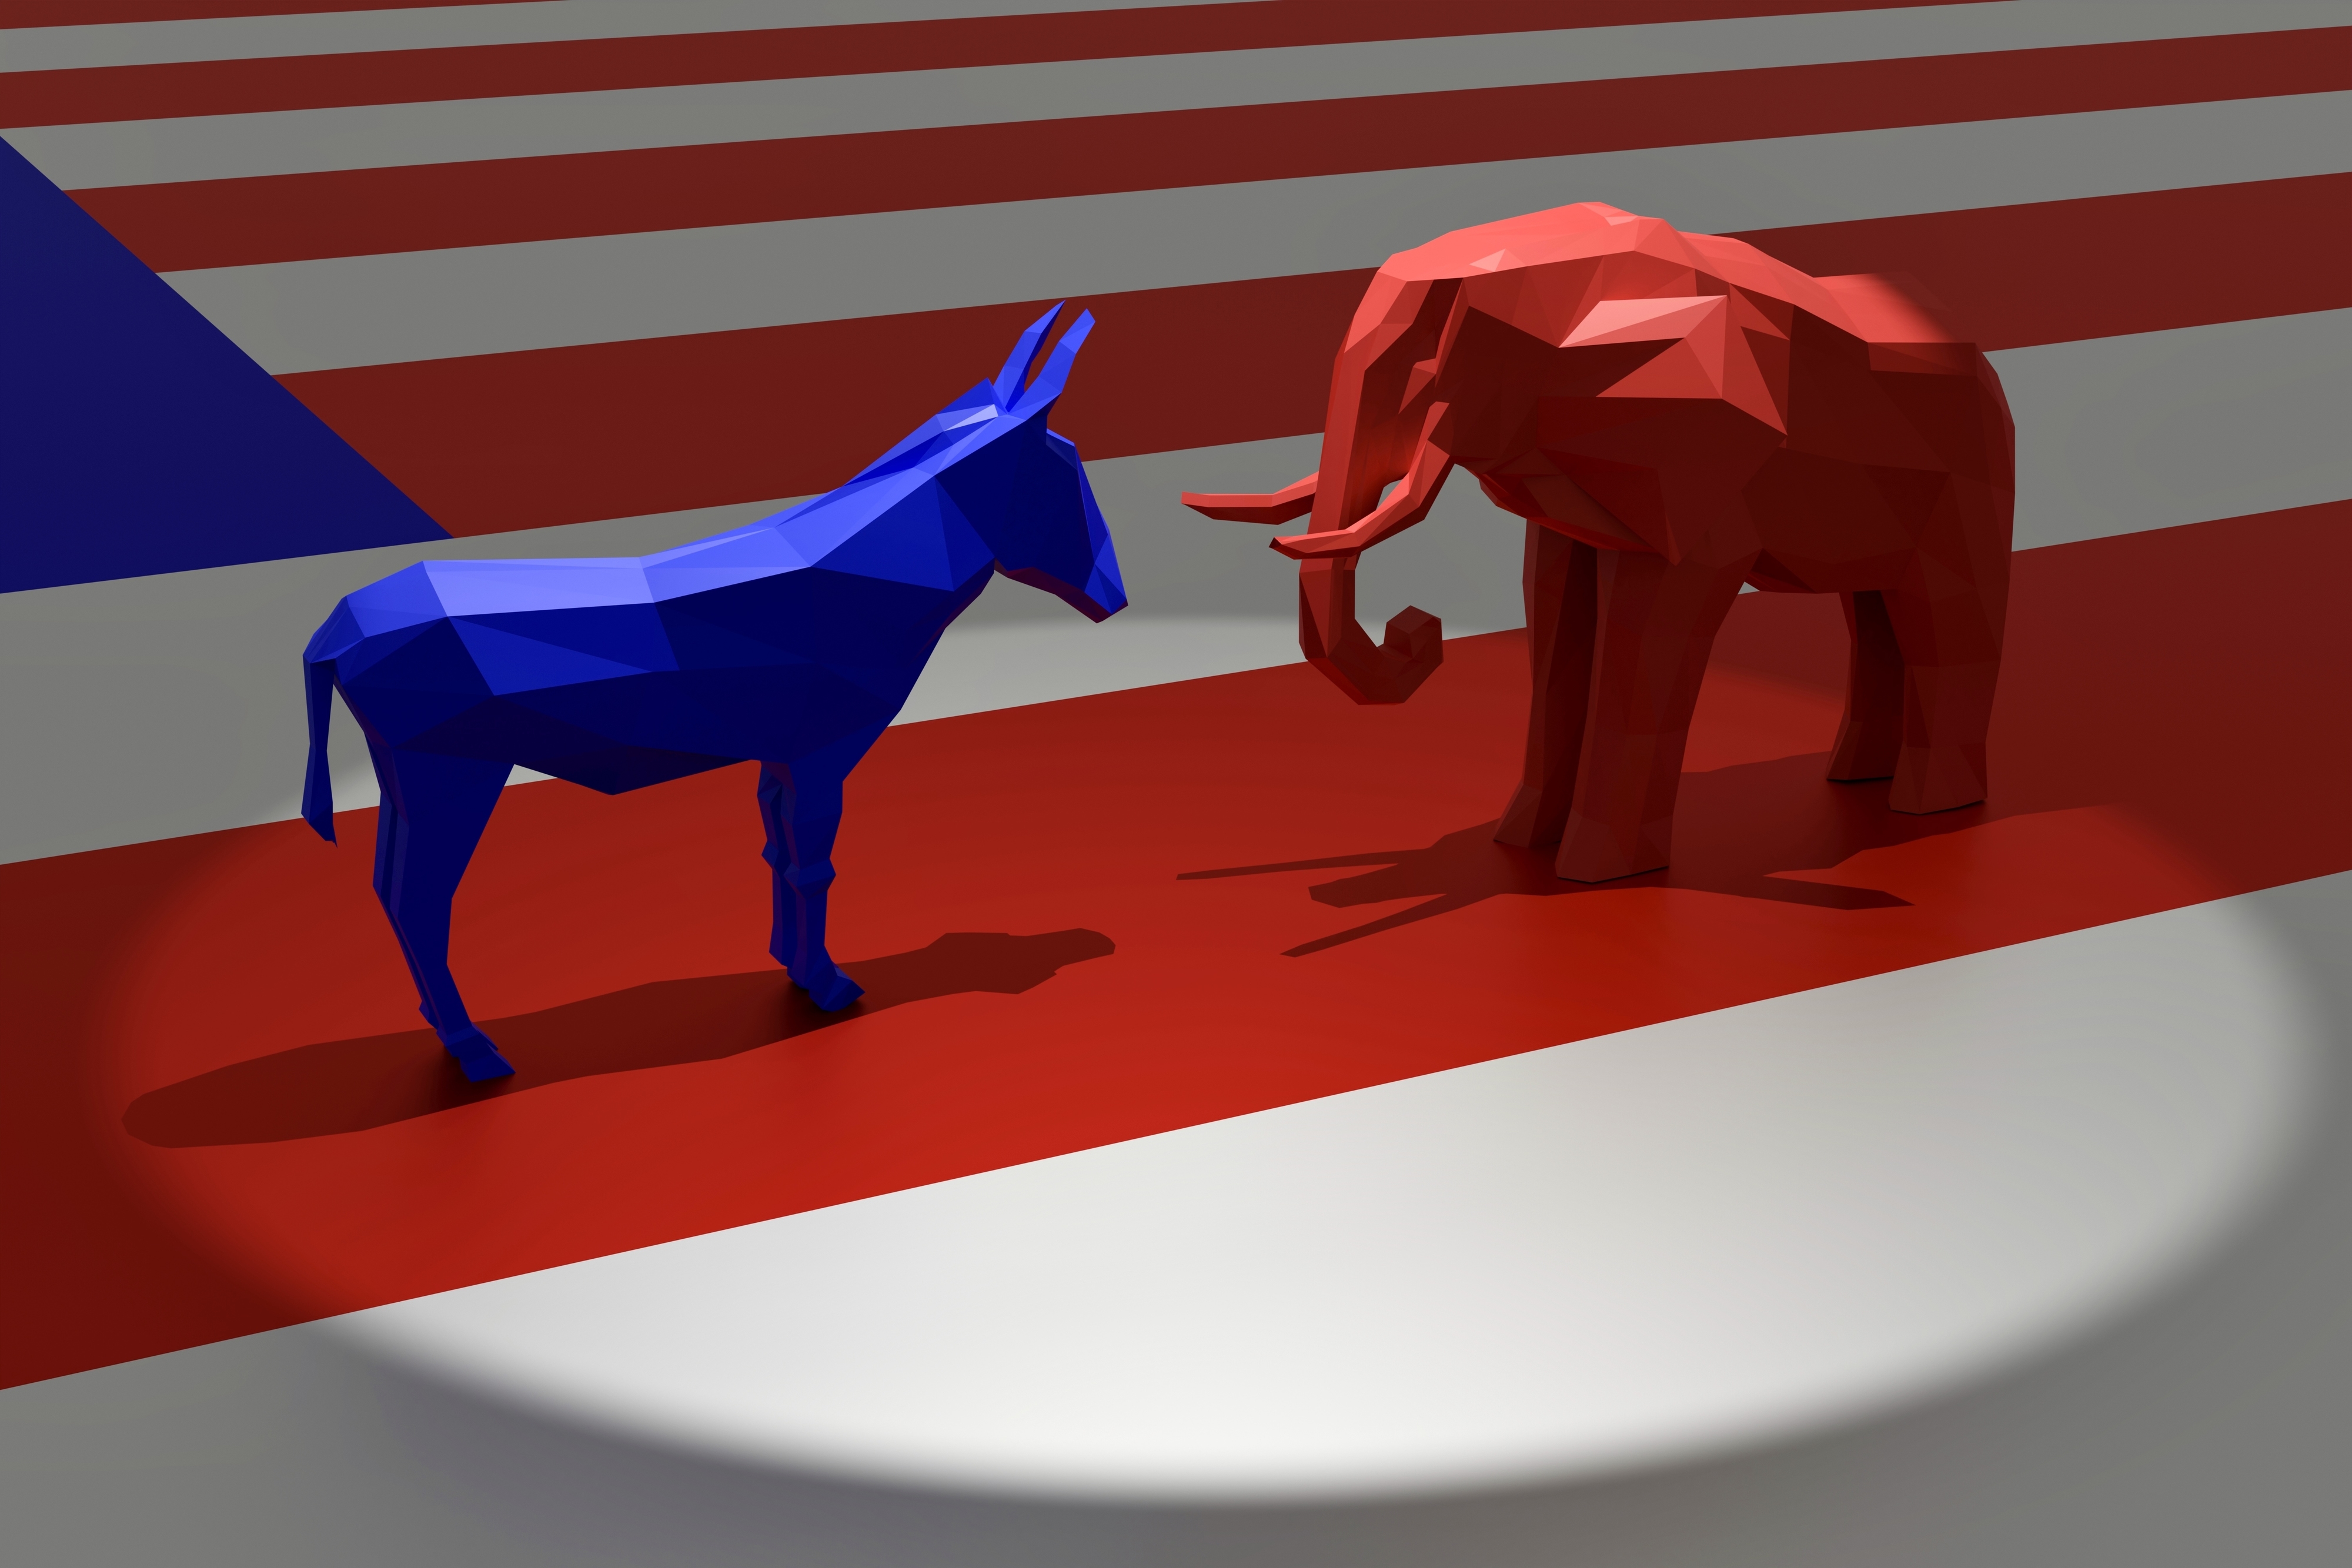 A blue donkey and a red elephant